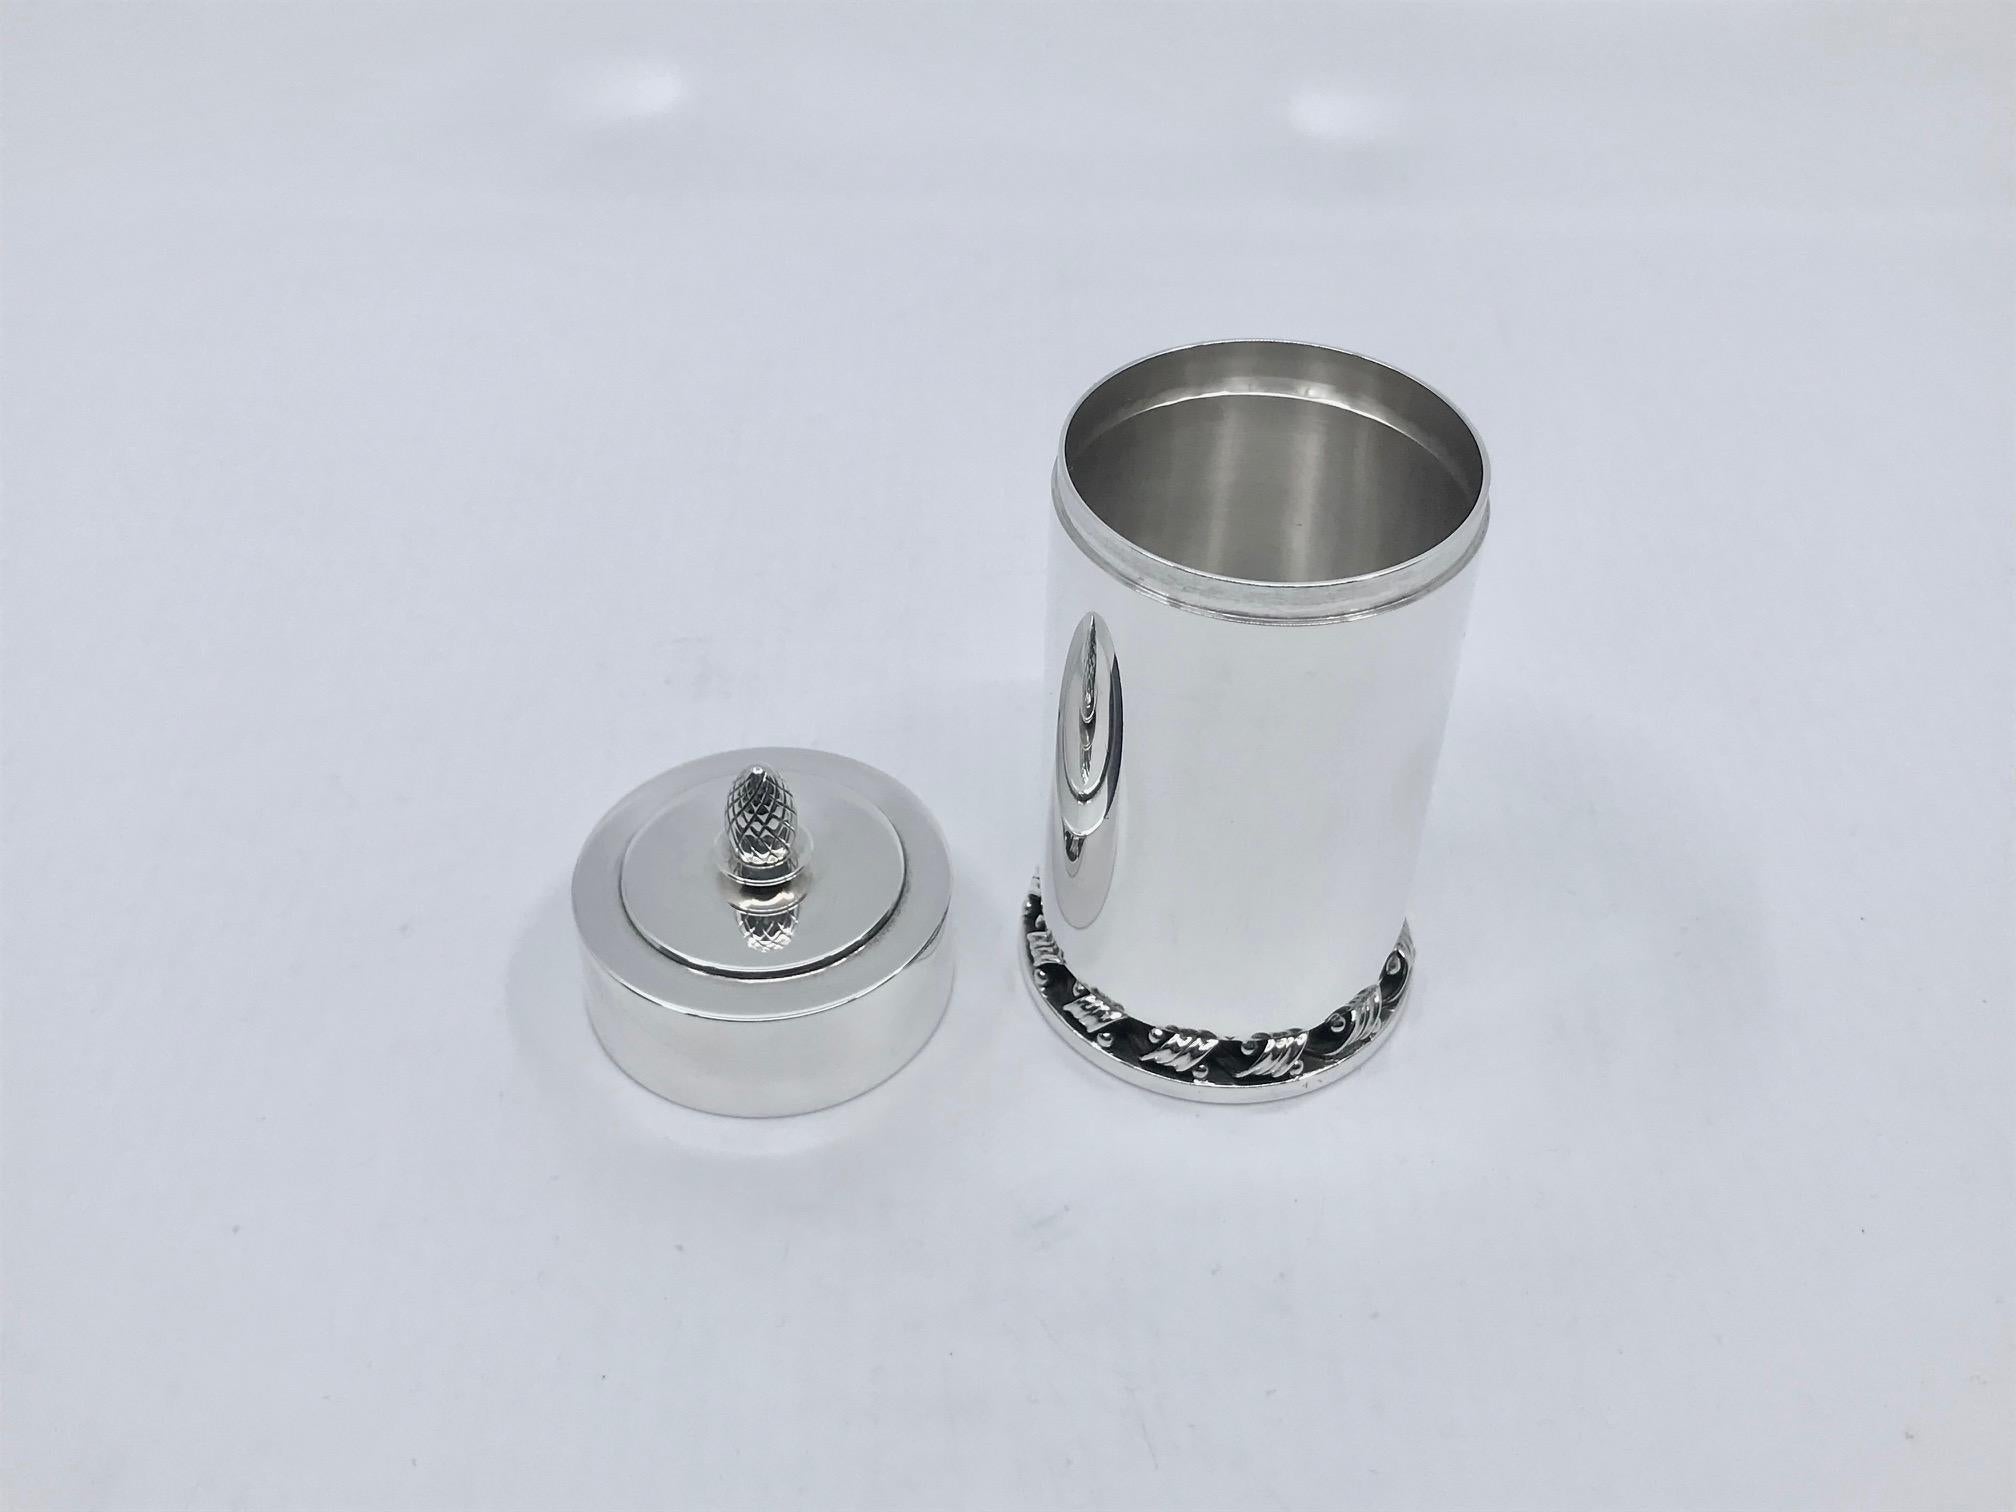 Sterling silver Georg Jensen Art Deco smokers set, including a cigarette box and matchstick stand, design #639 by Harald Nielsen from the early 1930s. The lid on the cigarette box is removable, the matchbox stand has an old matchbox which fits,